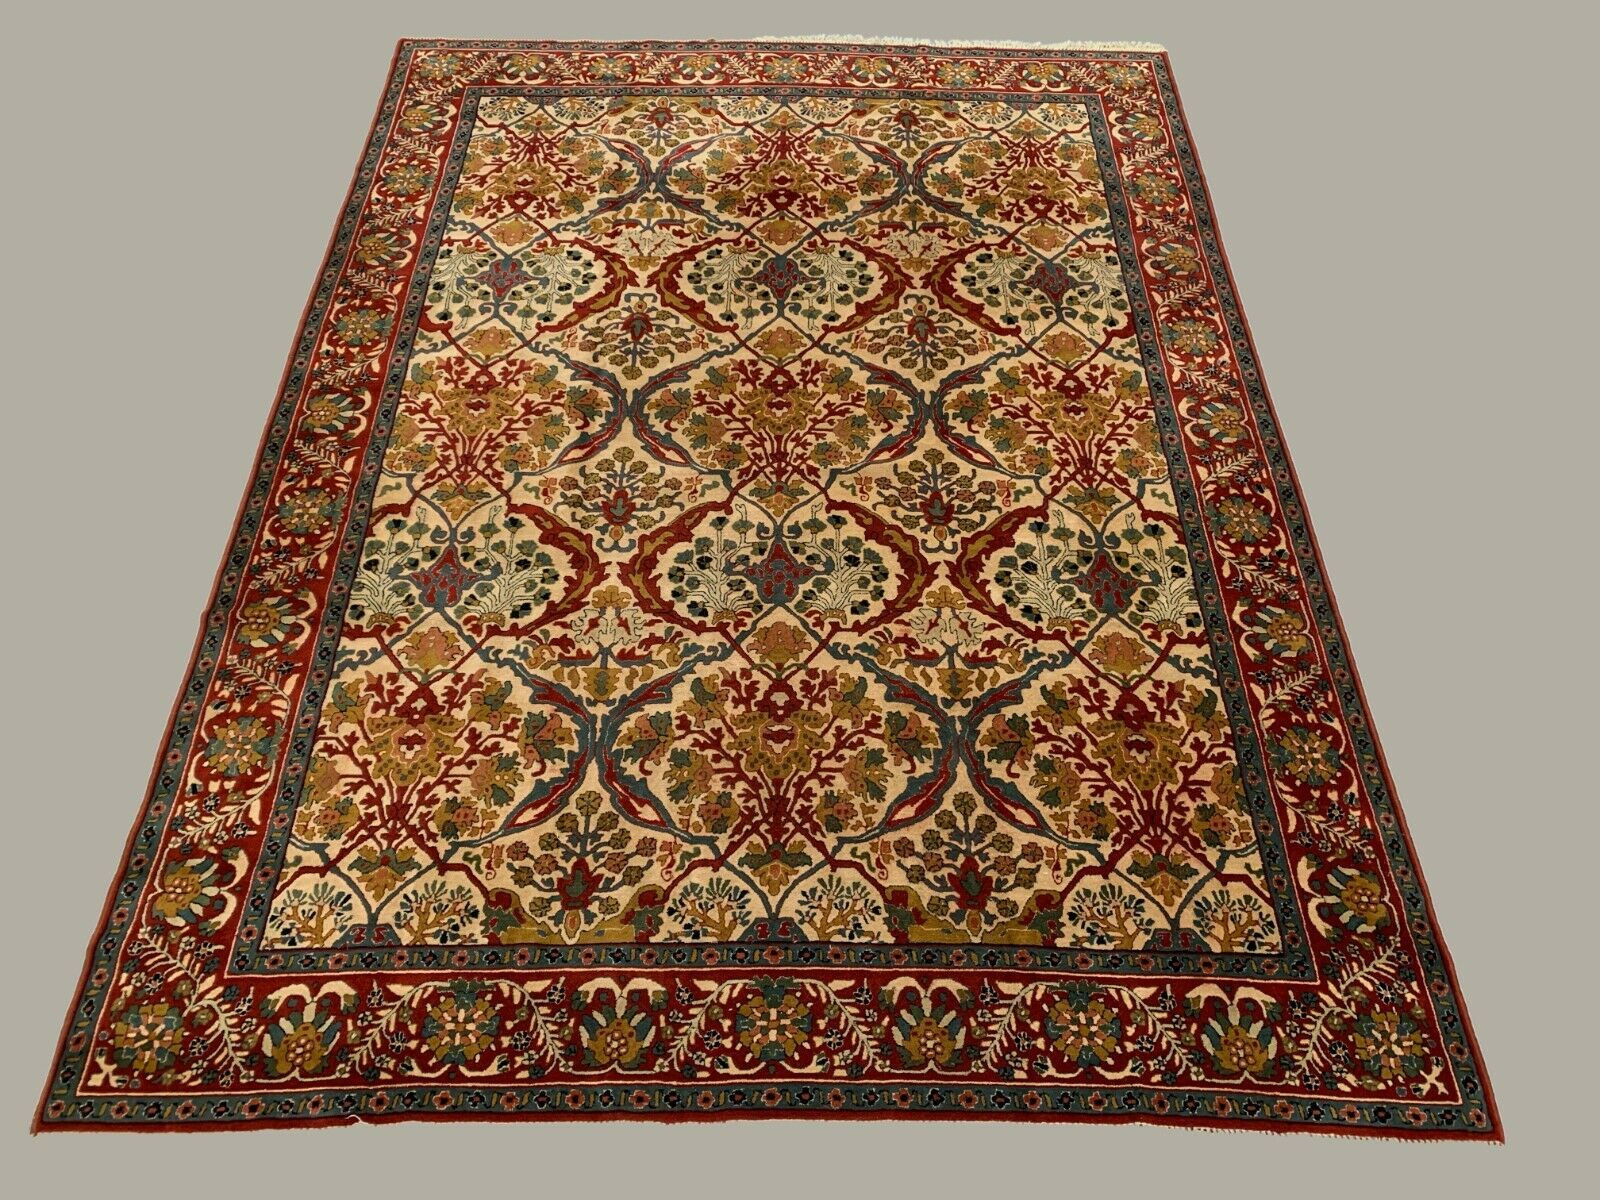 XL Vintage Arts and Crafts, W Morris style Rug 400x296 cm, Red Blue